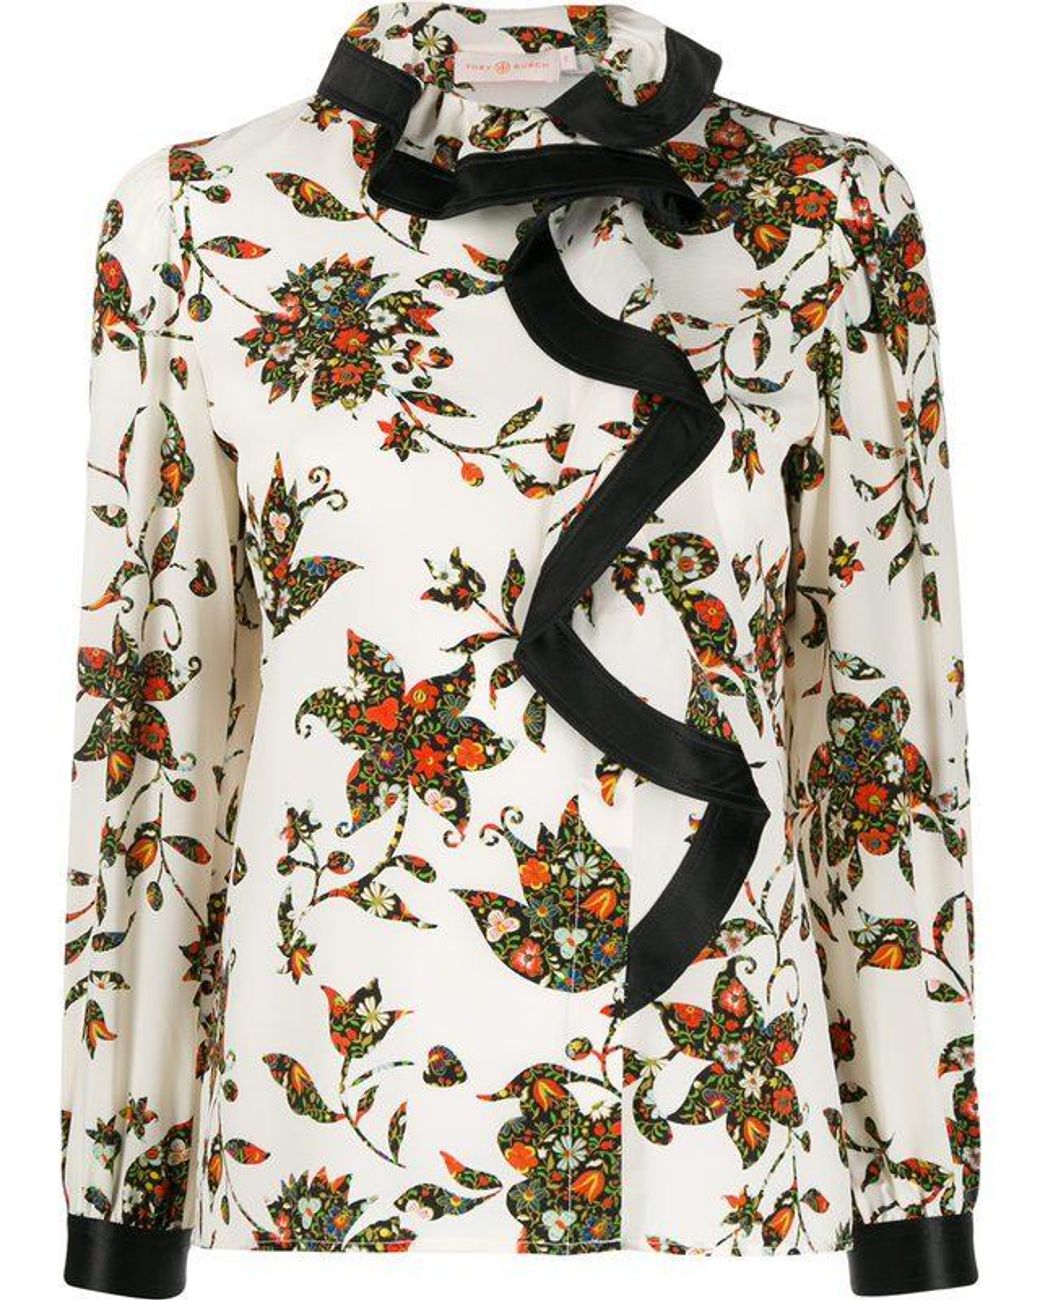 Tory Burch Floral Print Silk Blouse in White - Lyst